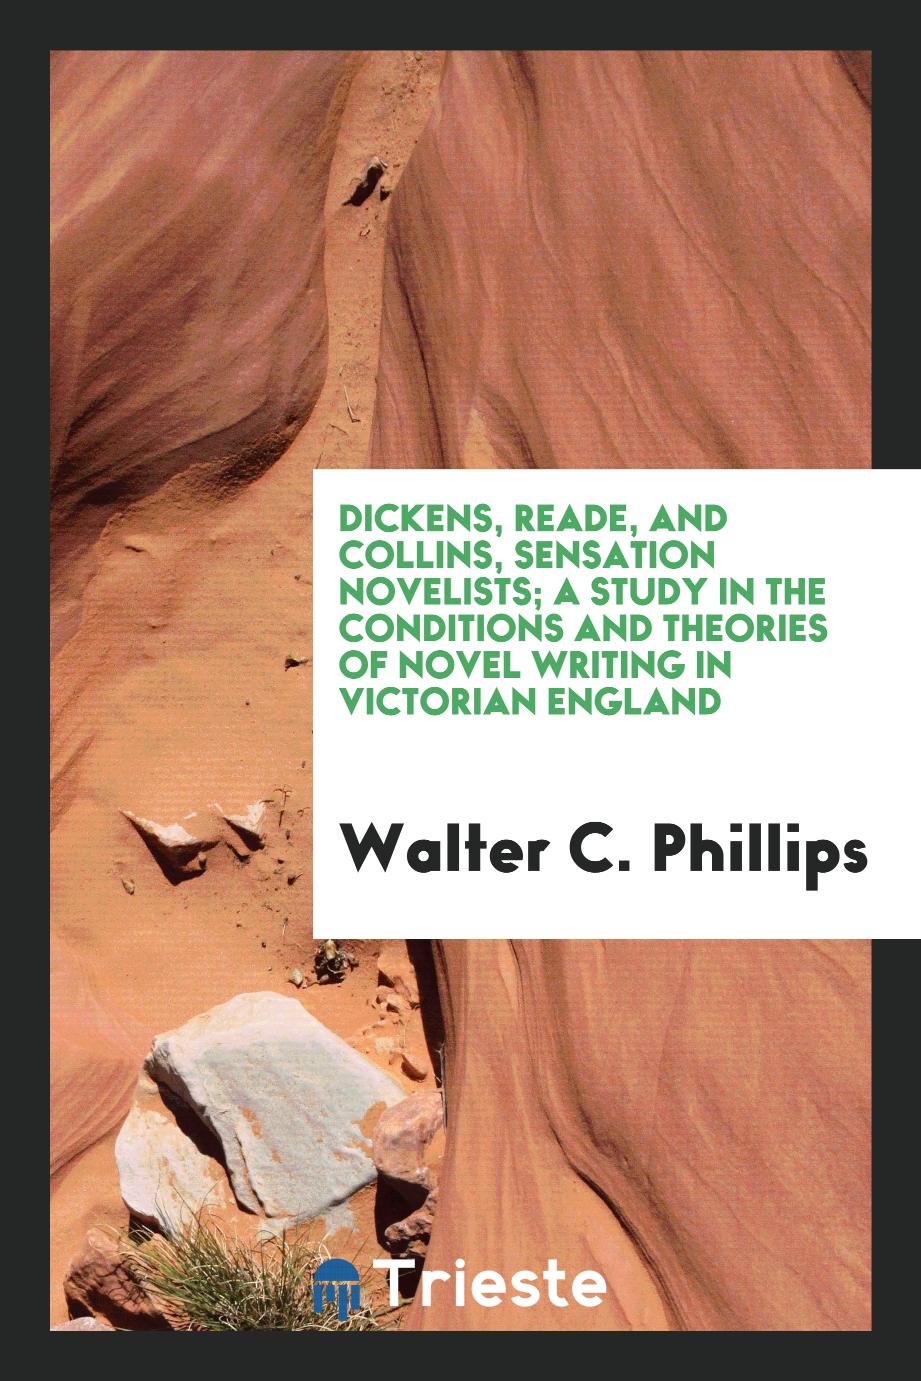 Dickens, Reade, and Collins, sensation novelists; a study in the conditions and theories of novel writing in Victorian England